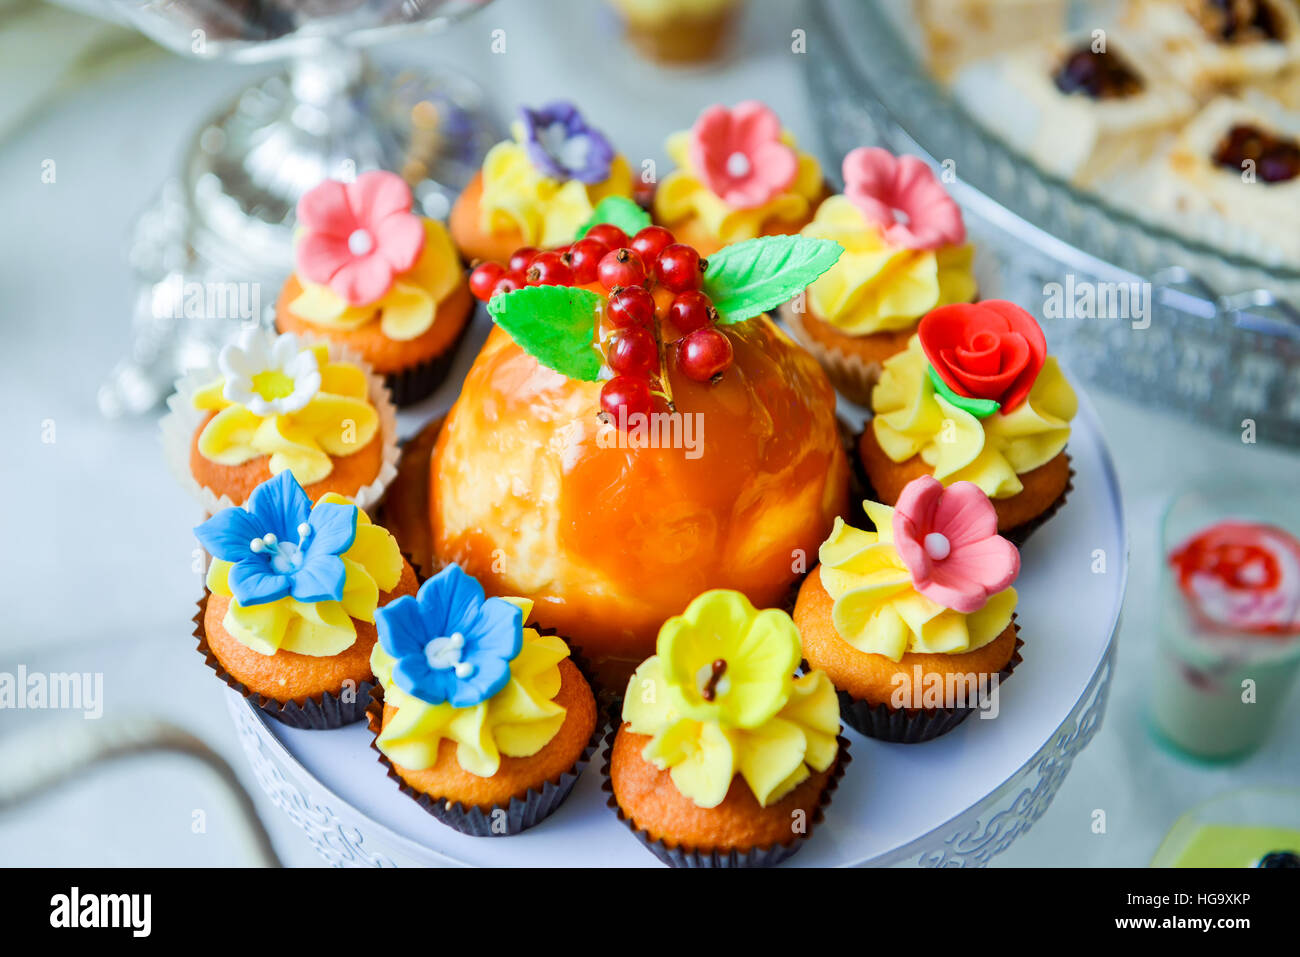 Muffins decorated with cream flowers on the table Stock Photo